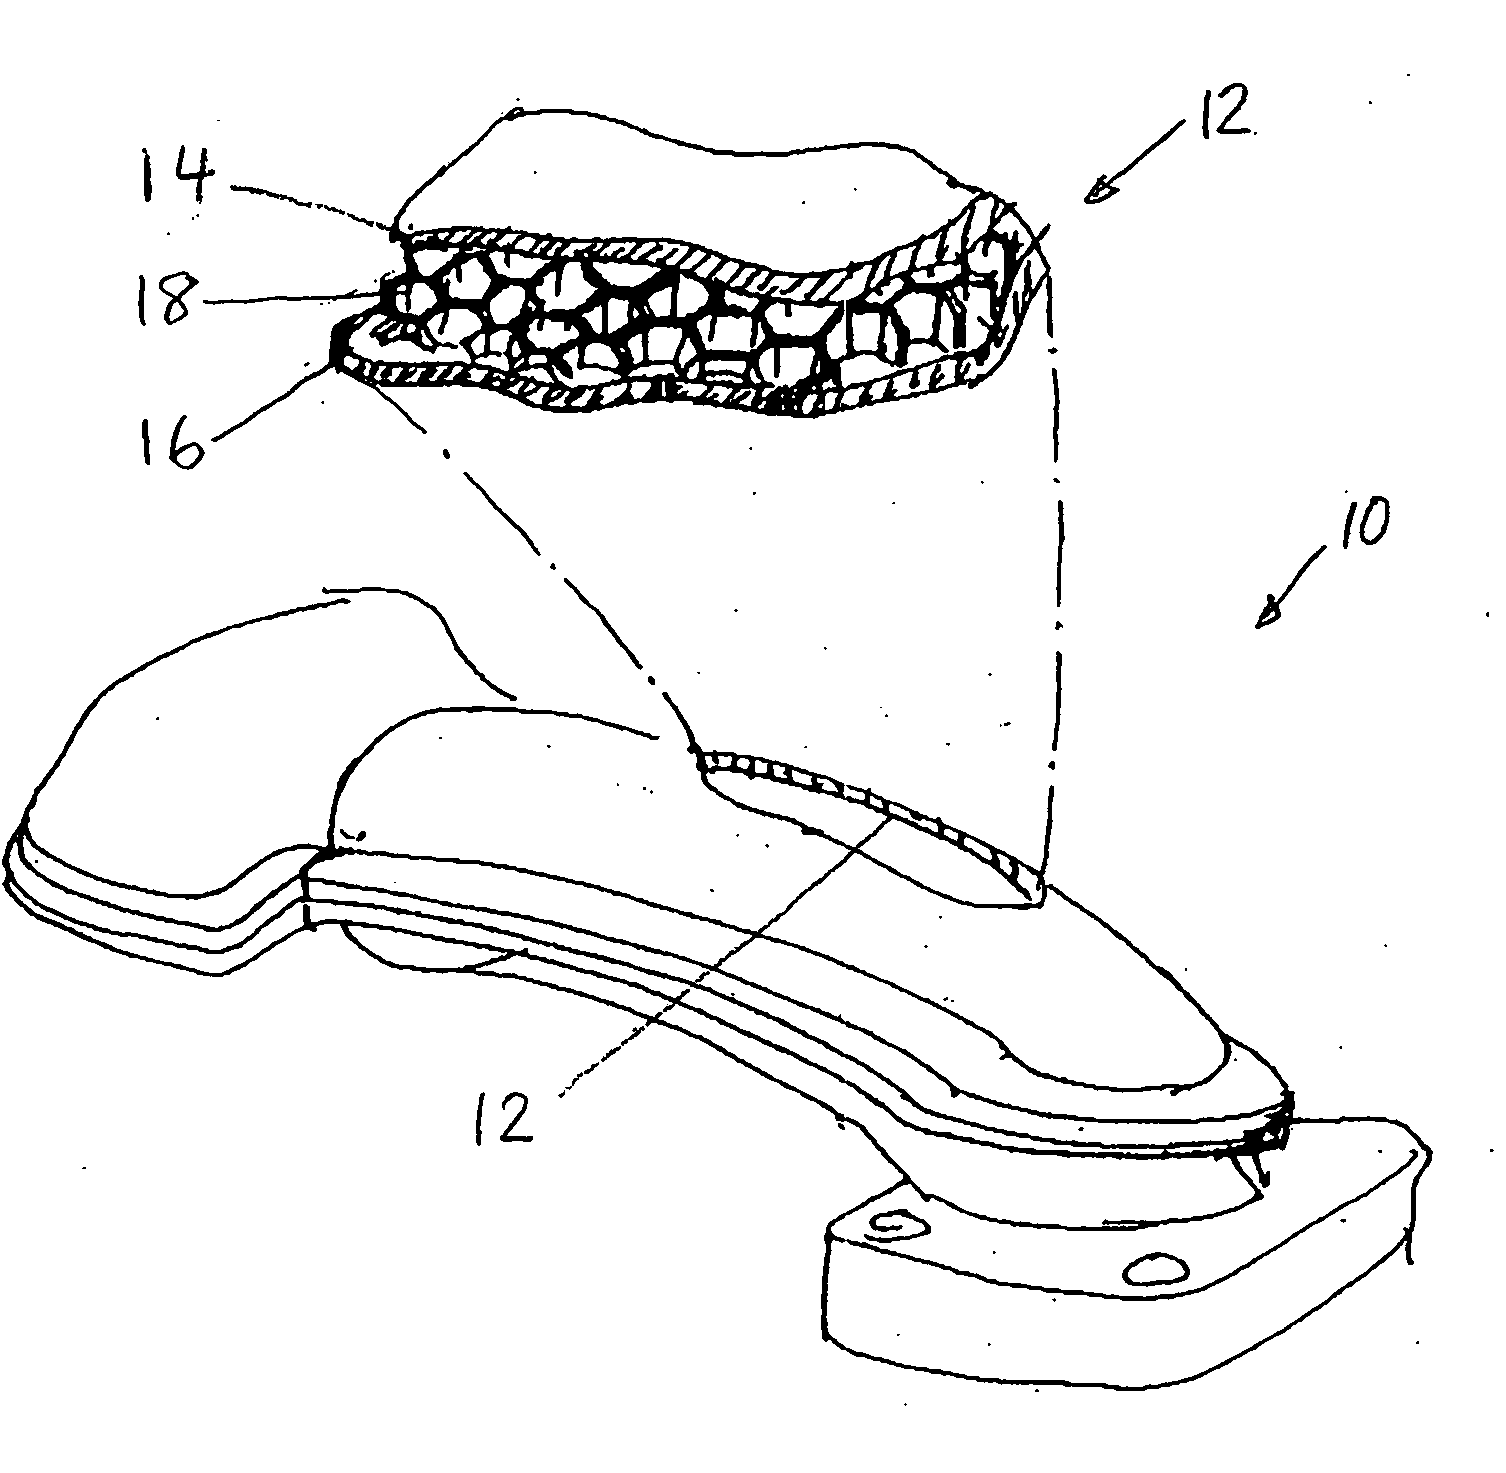 Engine component having a honeycomb structure